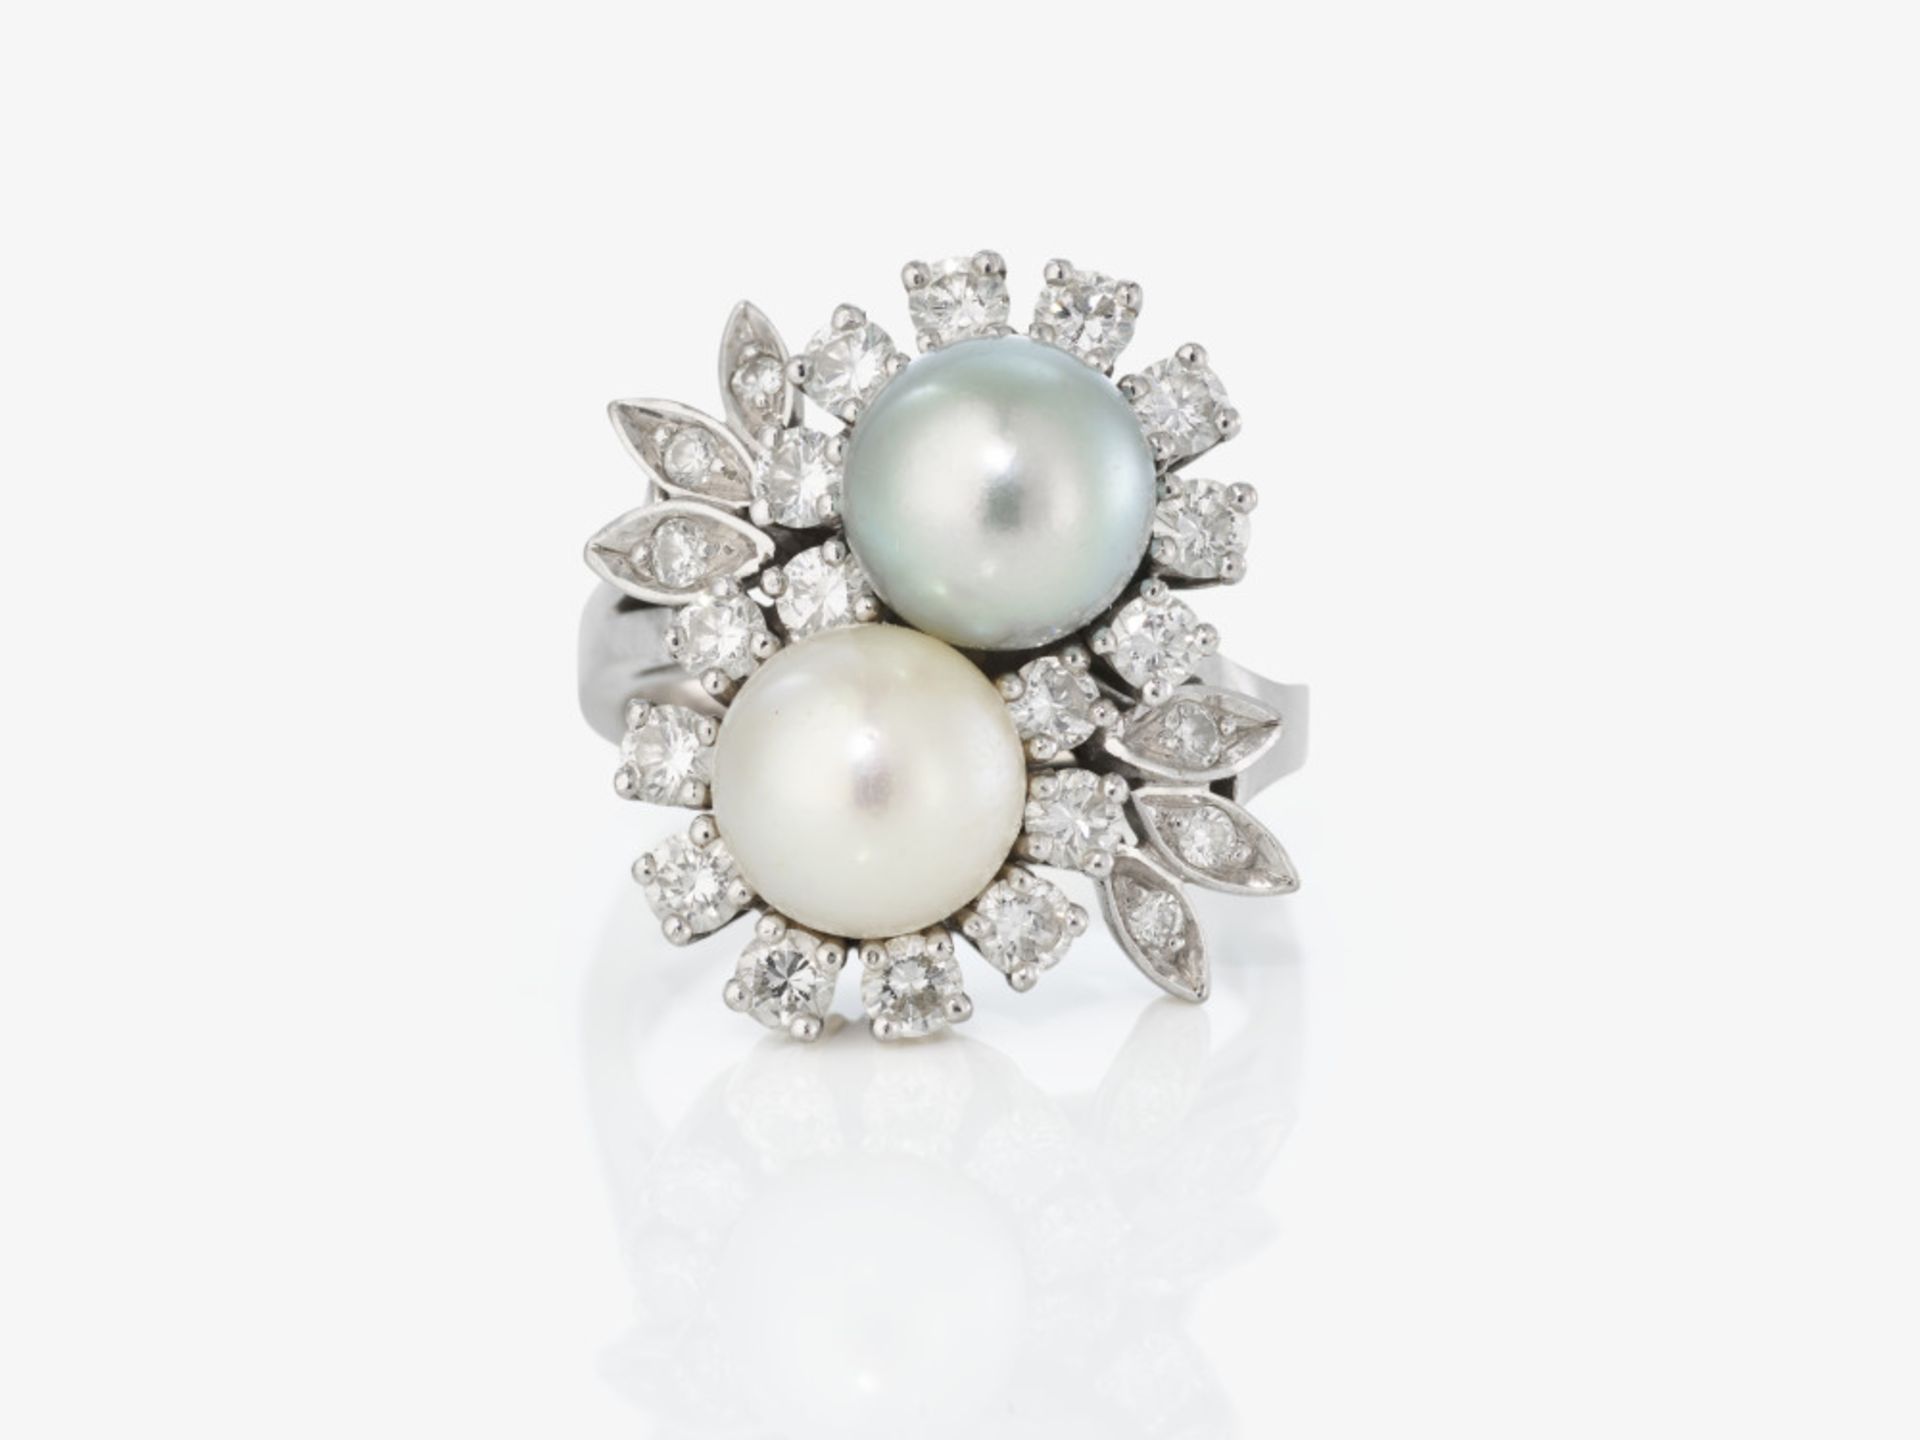 A ring with a white and grey cultured pearl and brilliant-cut diamonds - Germany, 1970s - Image 2 of 2